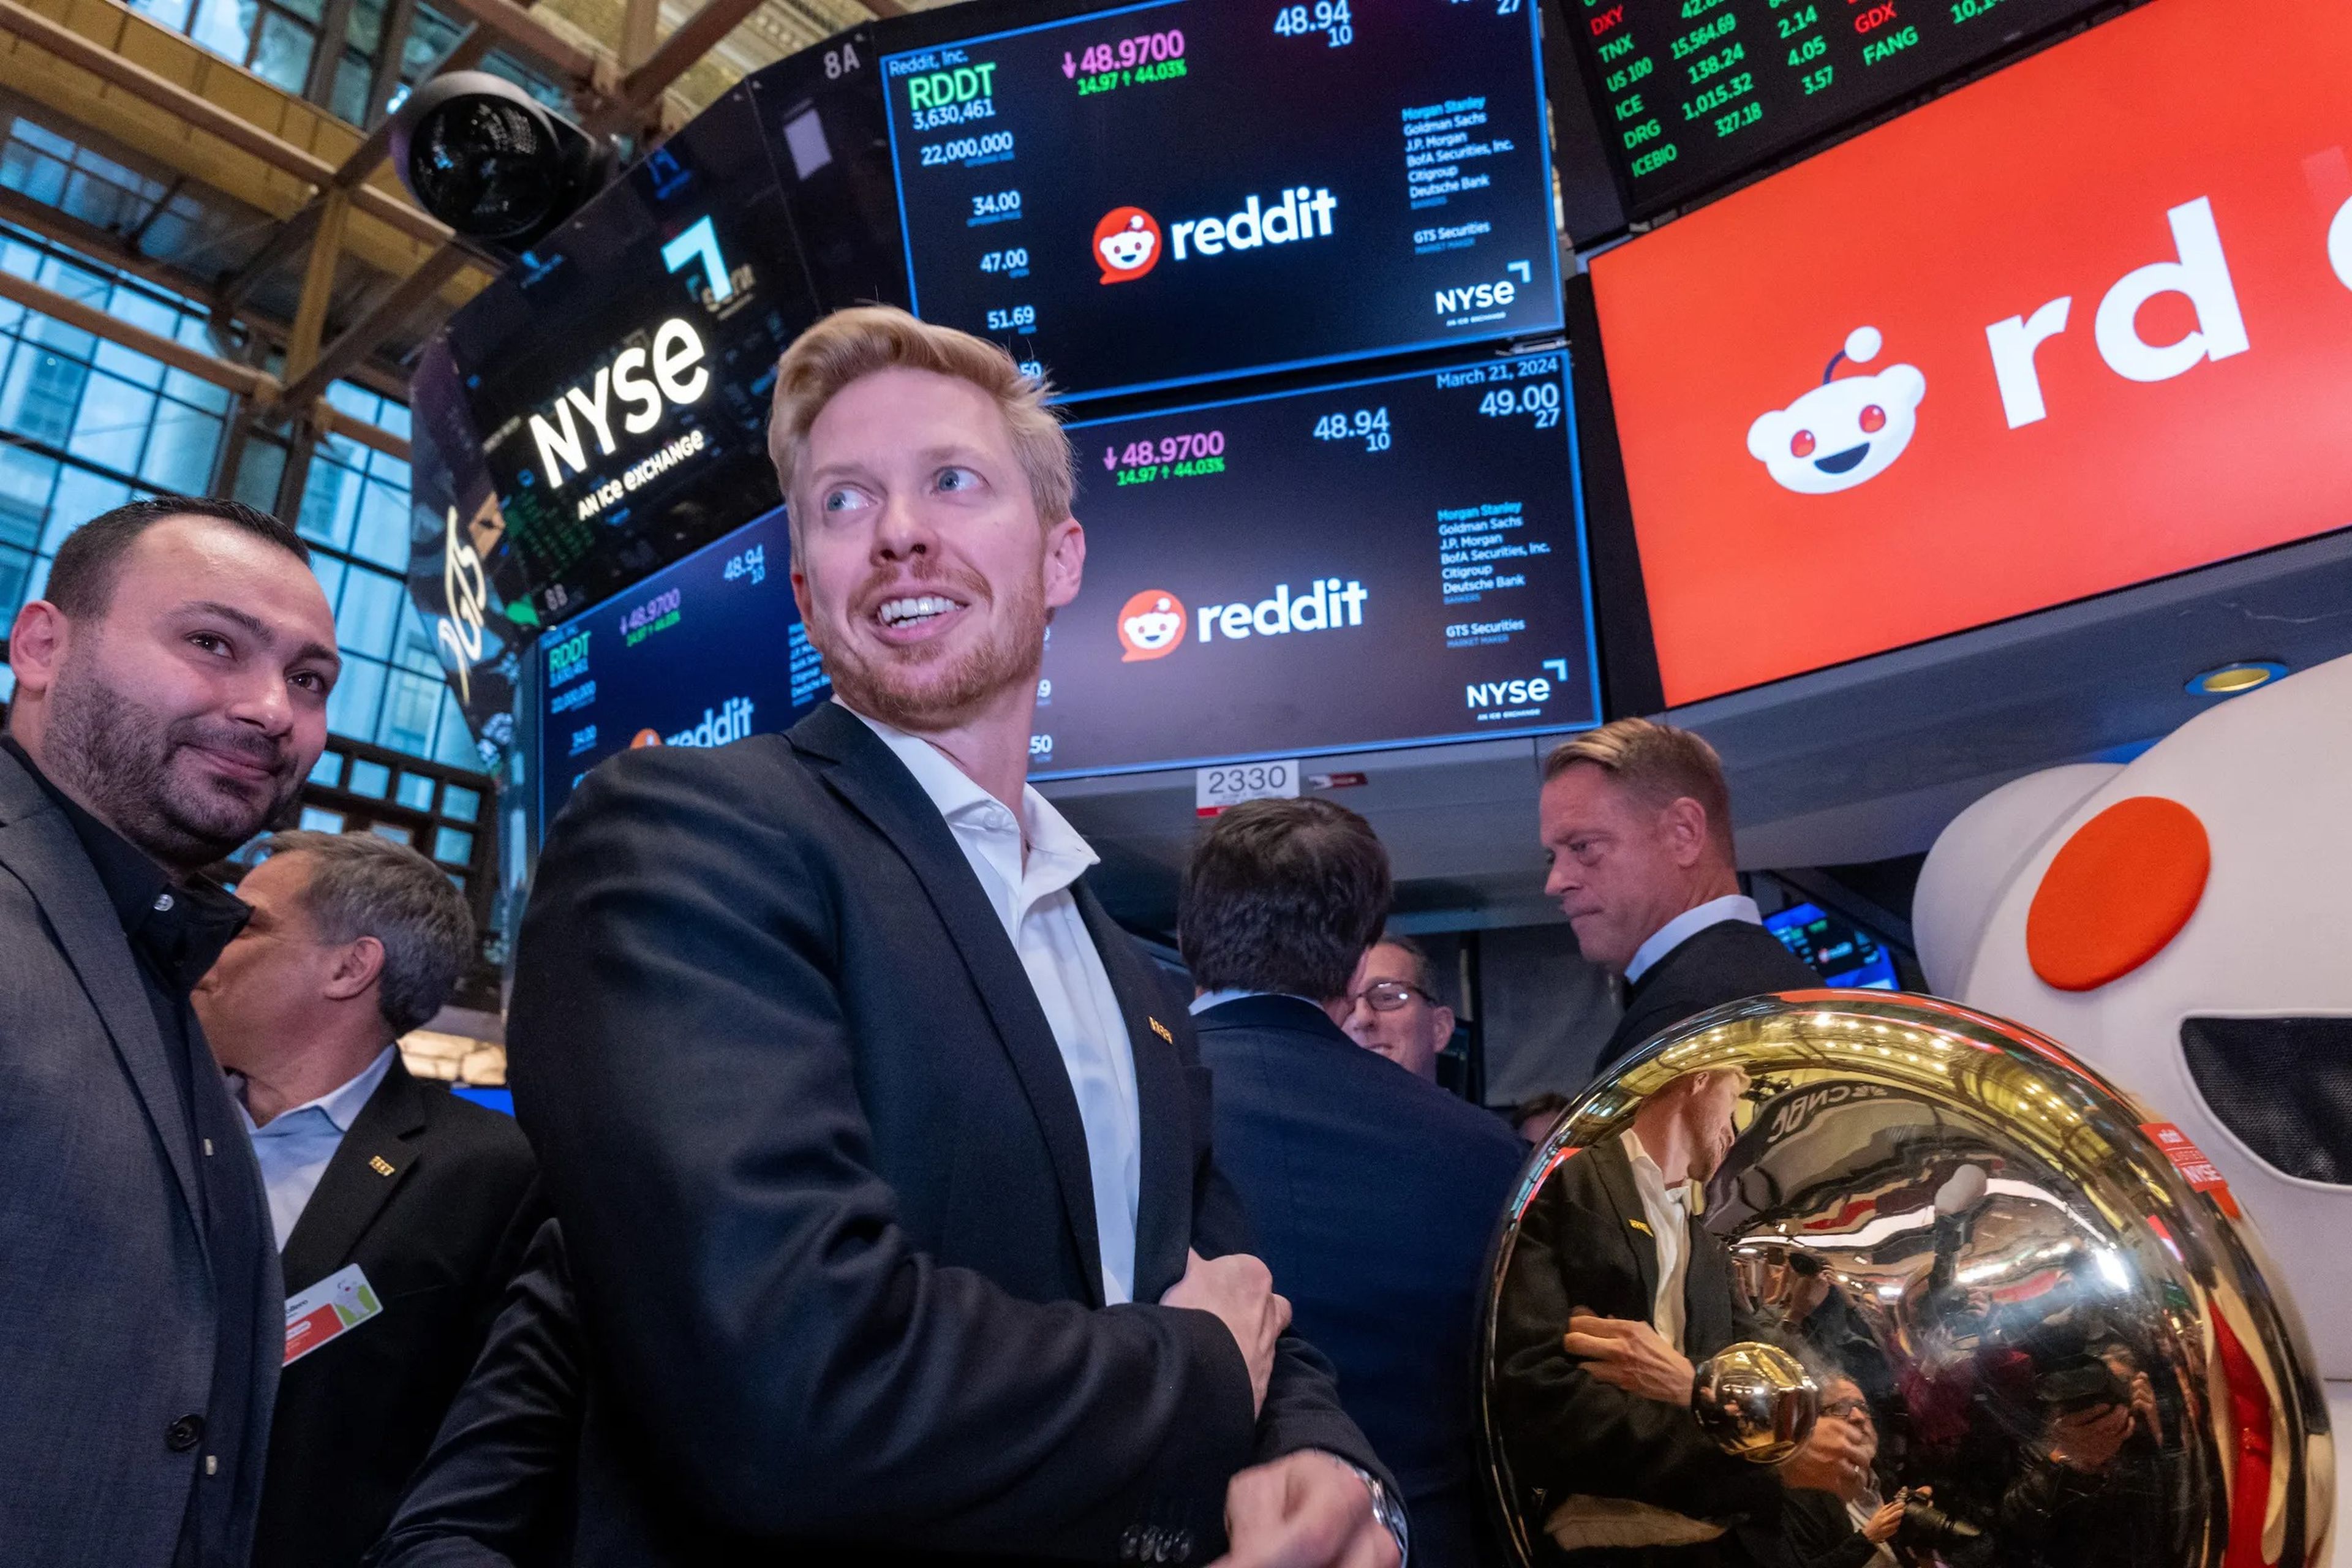 Reddit CEO Steve Huffman stands on the floor of the New York Stock Exchange after ringing a bell setting the share price at $47 in its initial public offering on March 21, 2024 in New York City.